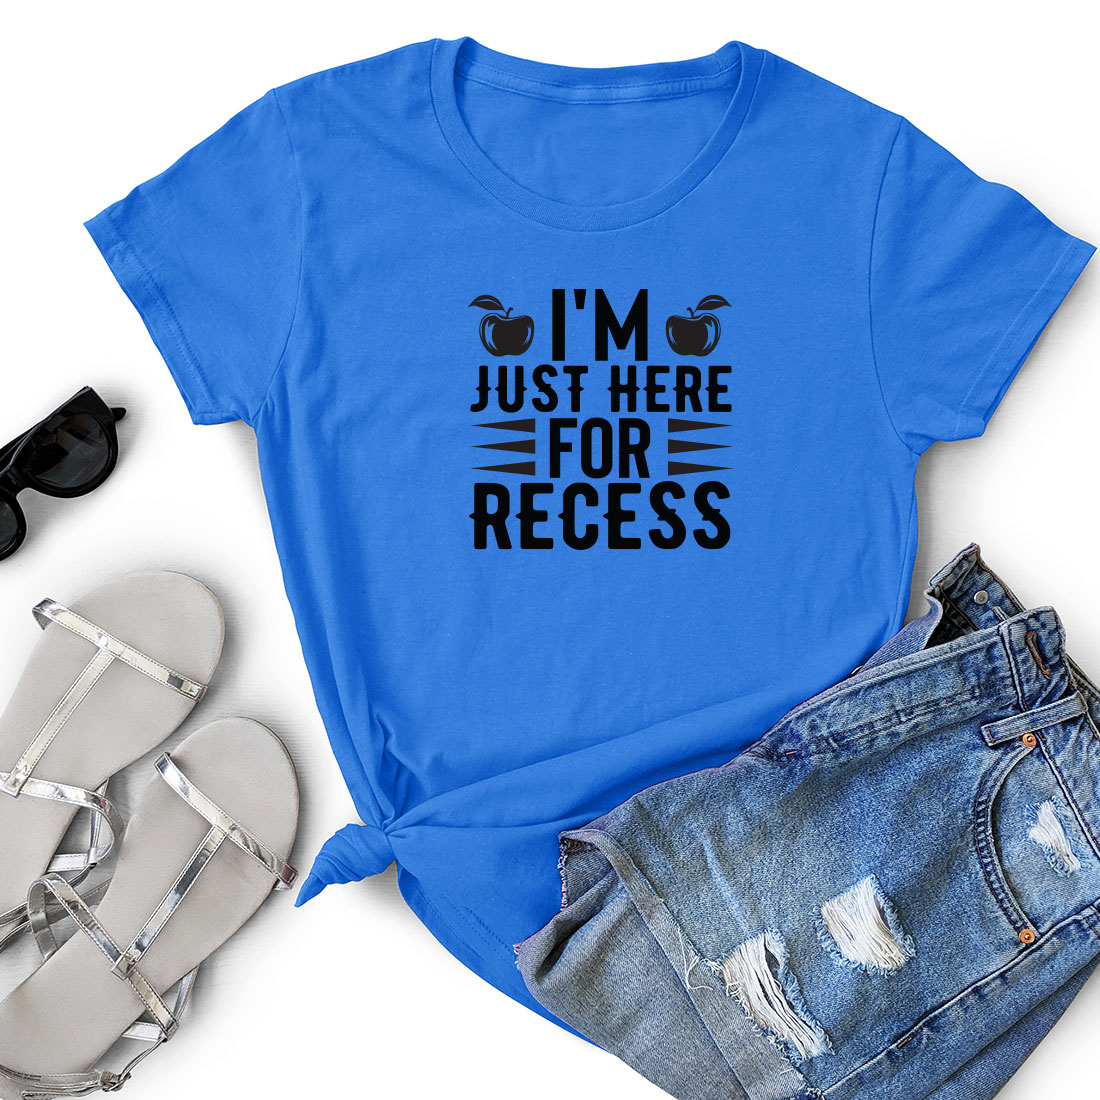 T - shirt that says i'm just here for recess.